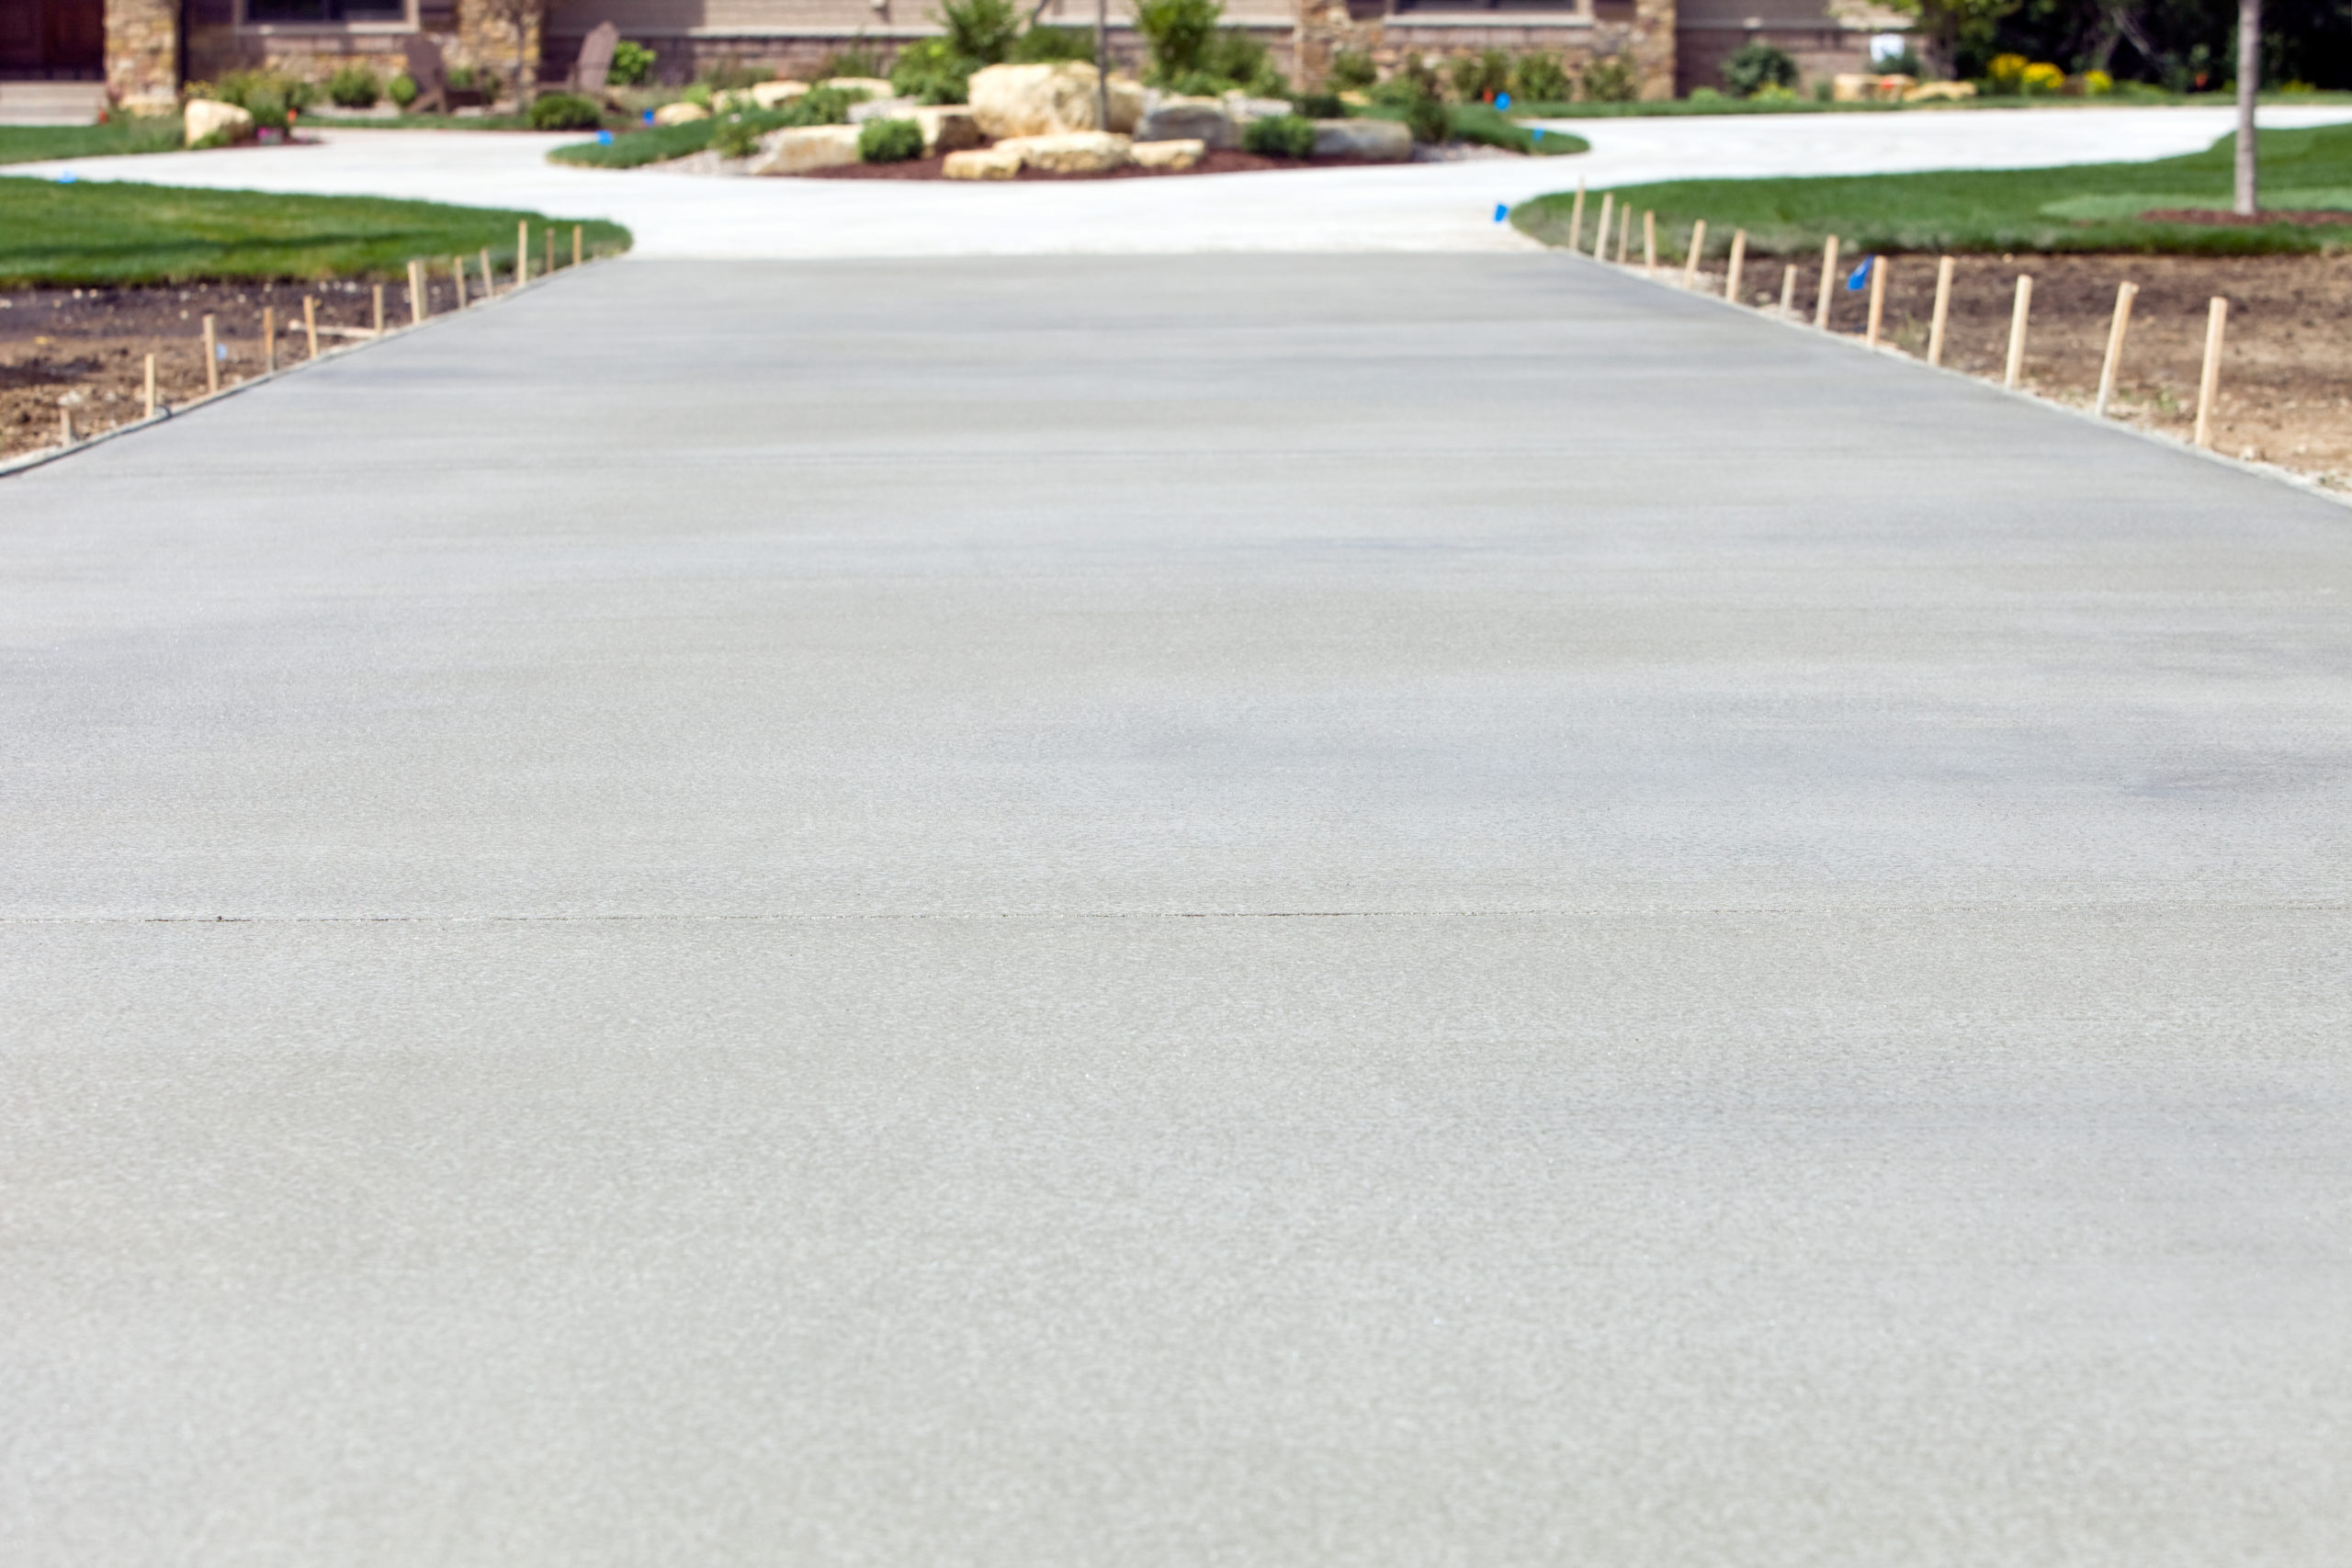  How Long Does It Take Concrete To Dry?  - Intermountain Concrete Specialties